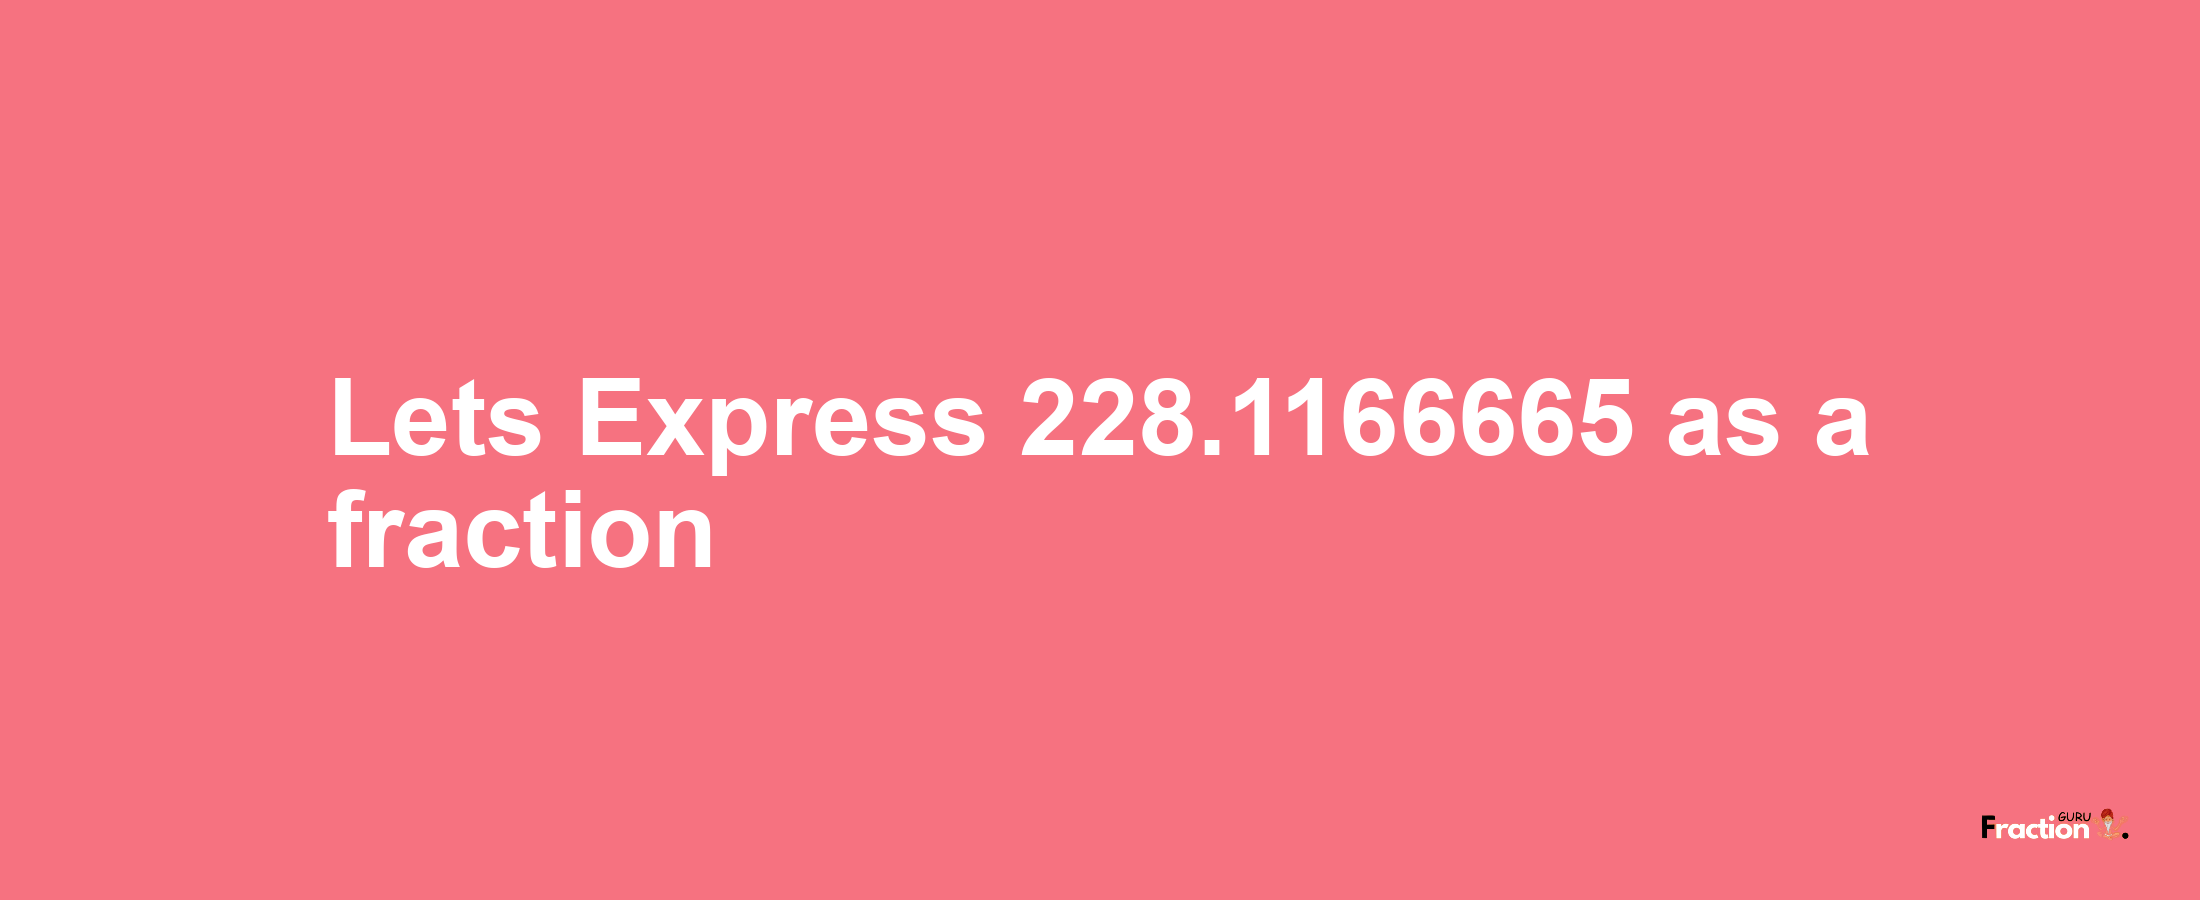 Lets Express 228.1166665 as afraction